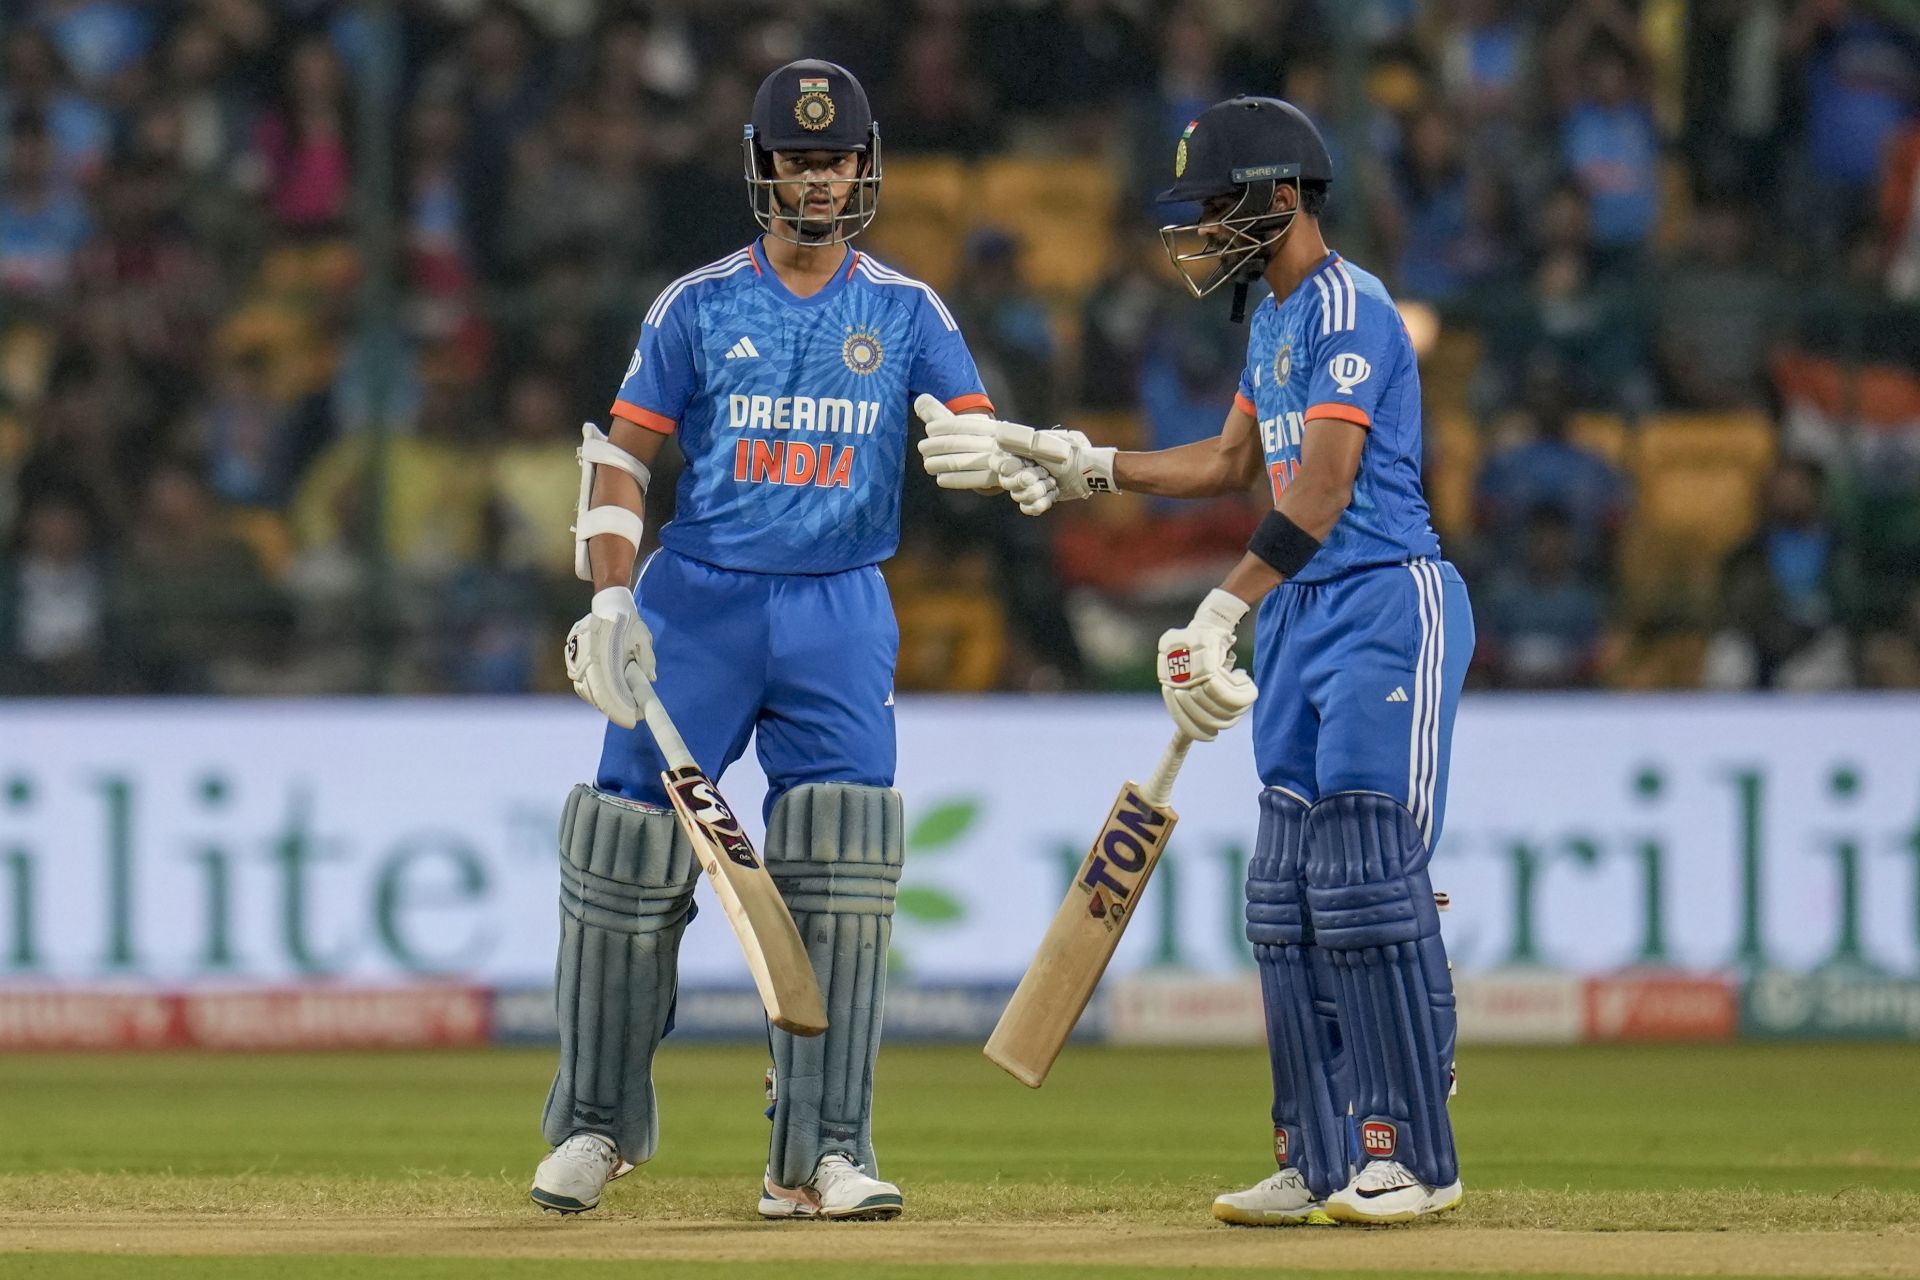 India will rely a lot on their young openers